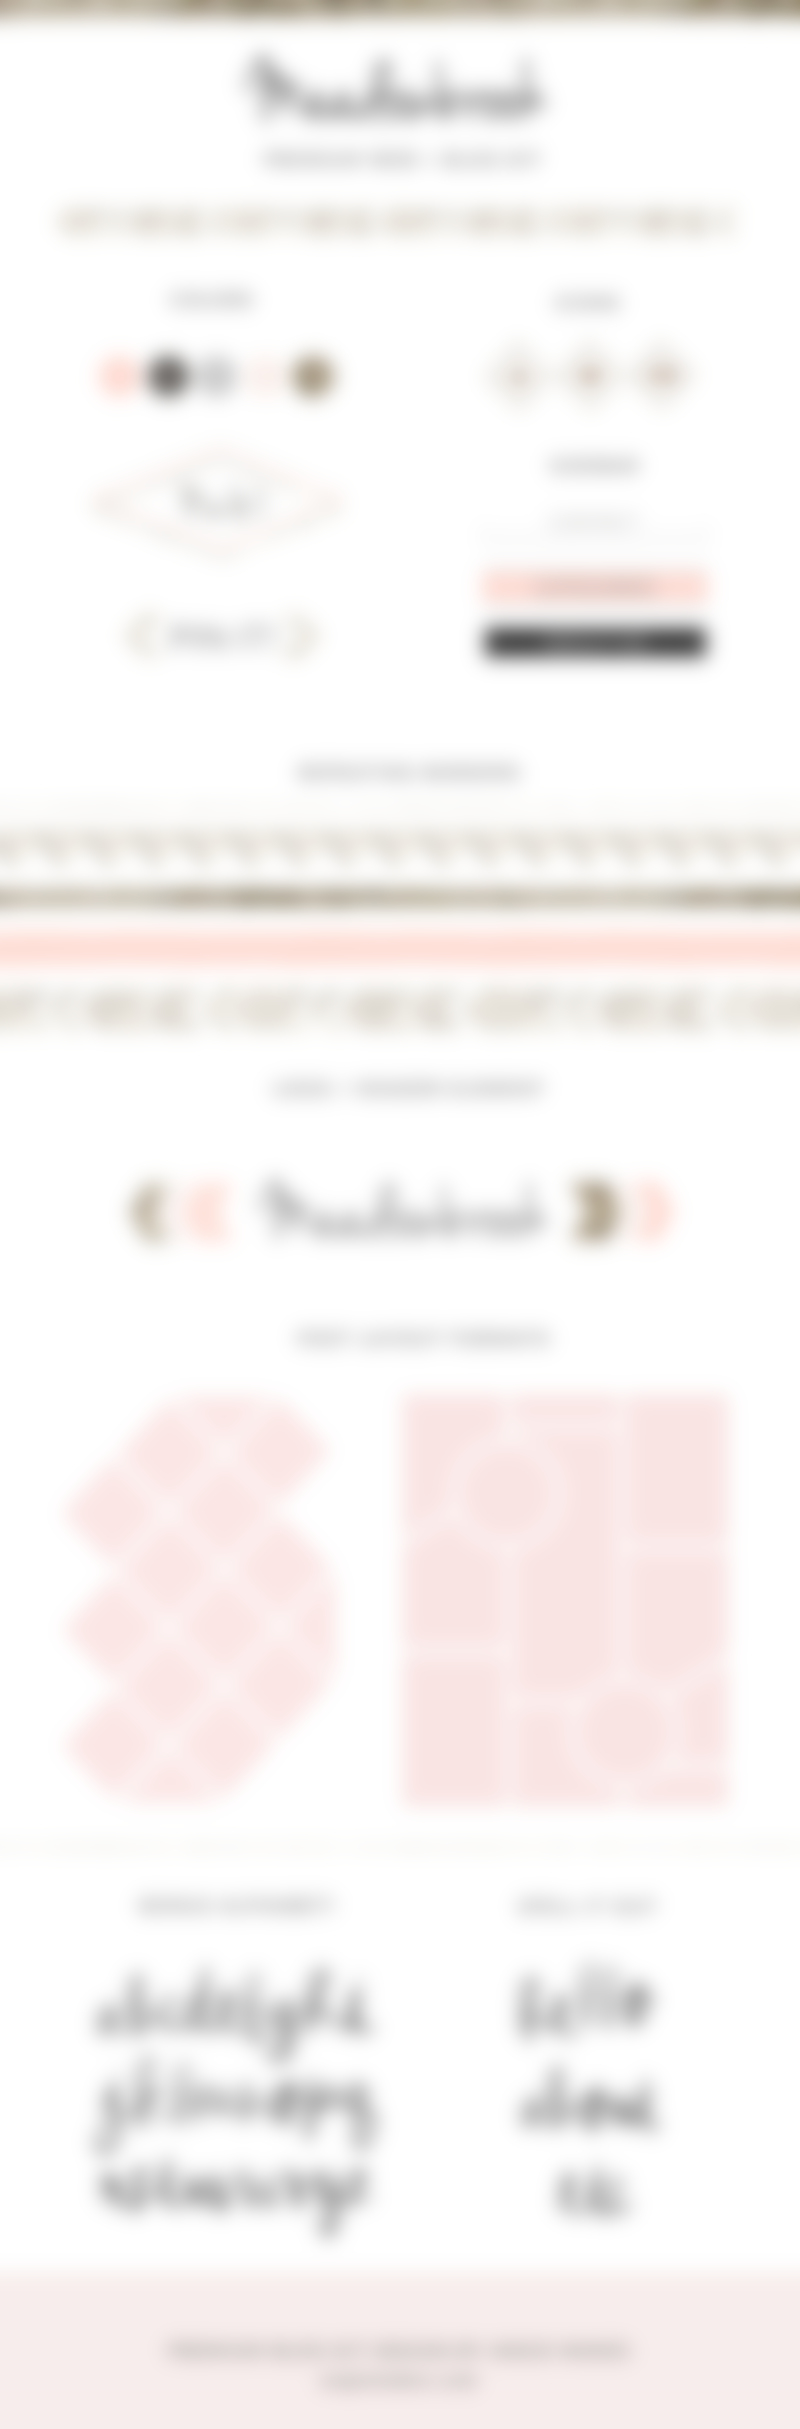 Modern Premade Blog Kit By Angie Makes. Spruce up Your Blog In No Time With This Blog Design Graphic Set!